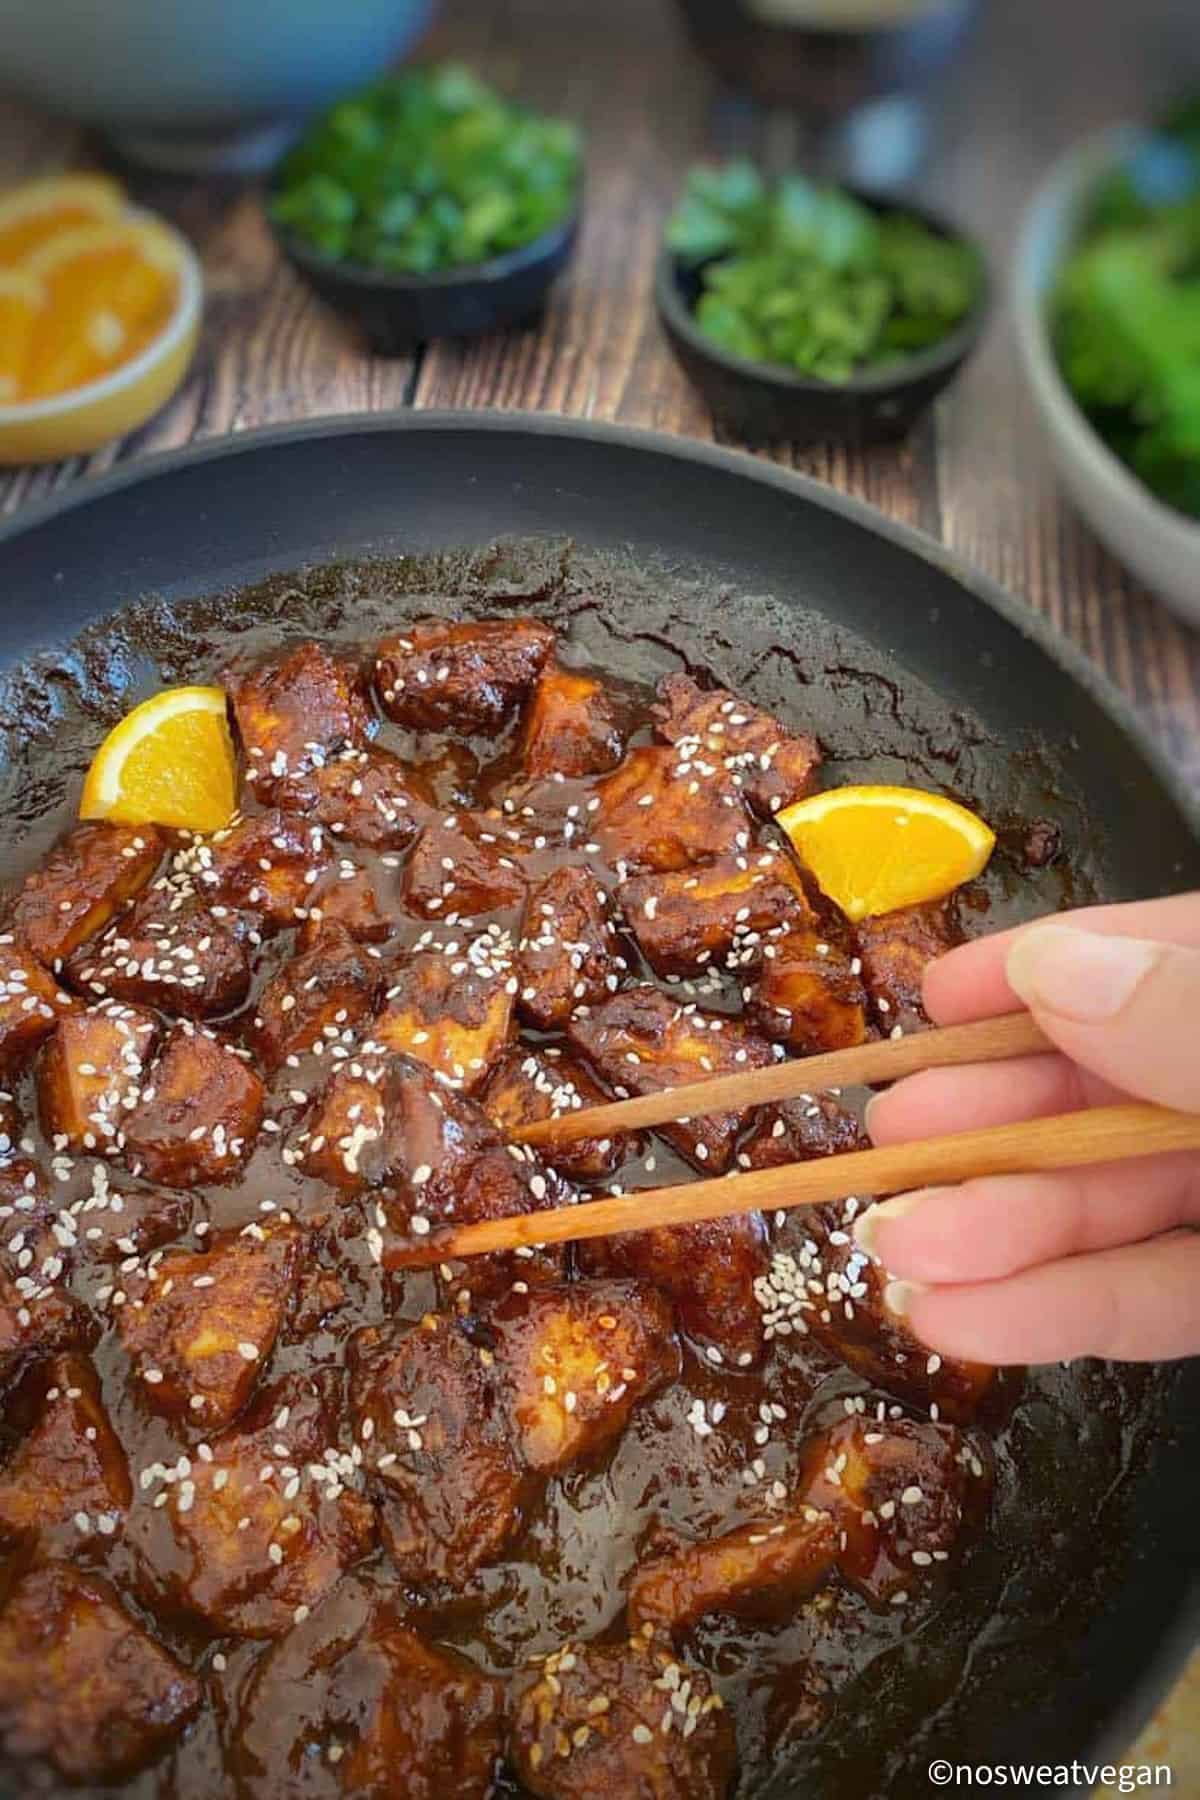 Skillet with vegan orange chicken and hand picking up a piece of tofu with chopsticks.